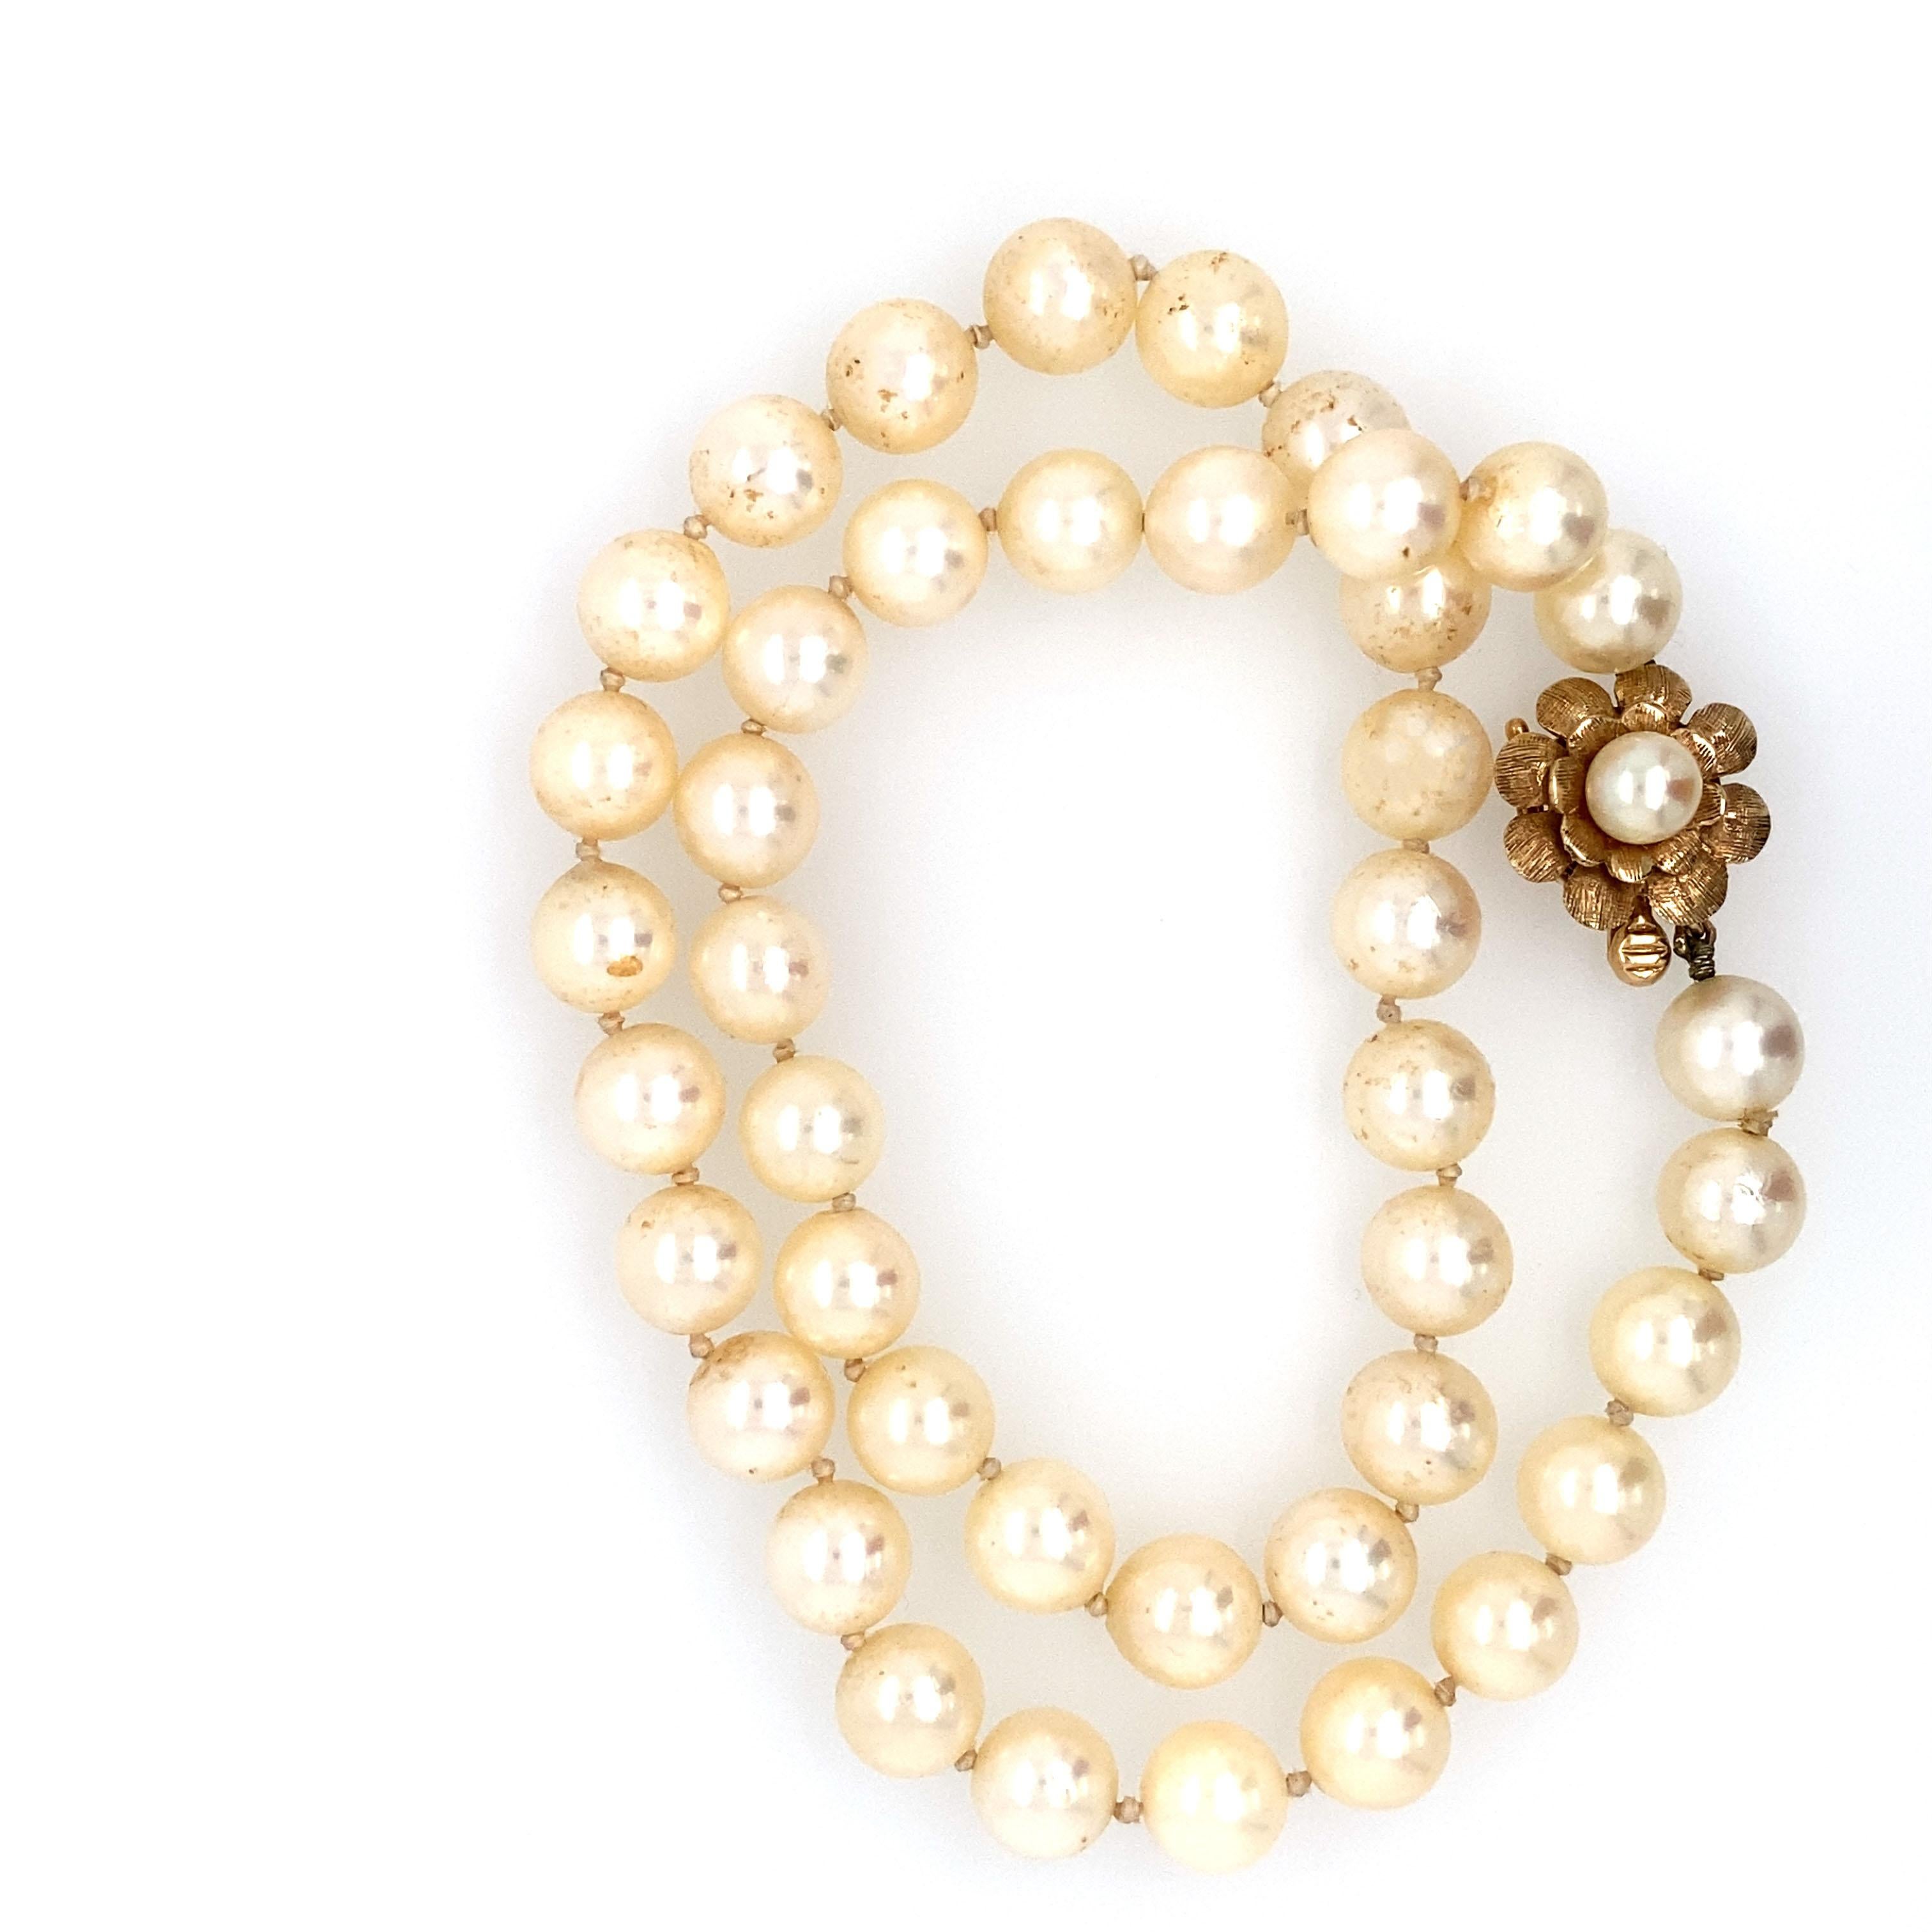 Circa: 1980
Metal Type: 14 karat yellow gold 
Length: 15 inches

Each pearl is 8 millimeter 
One pearl strand makes up the necklace 
The clasp is floral shaped with high contrast textured gold. 